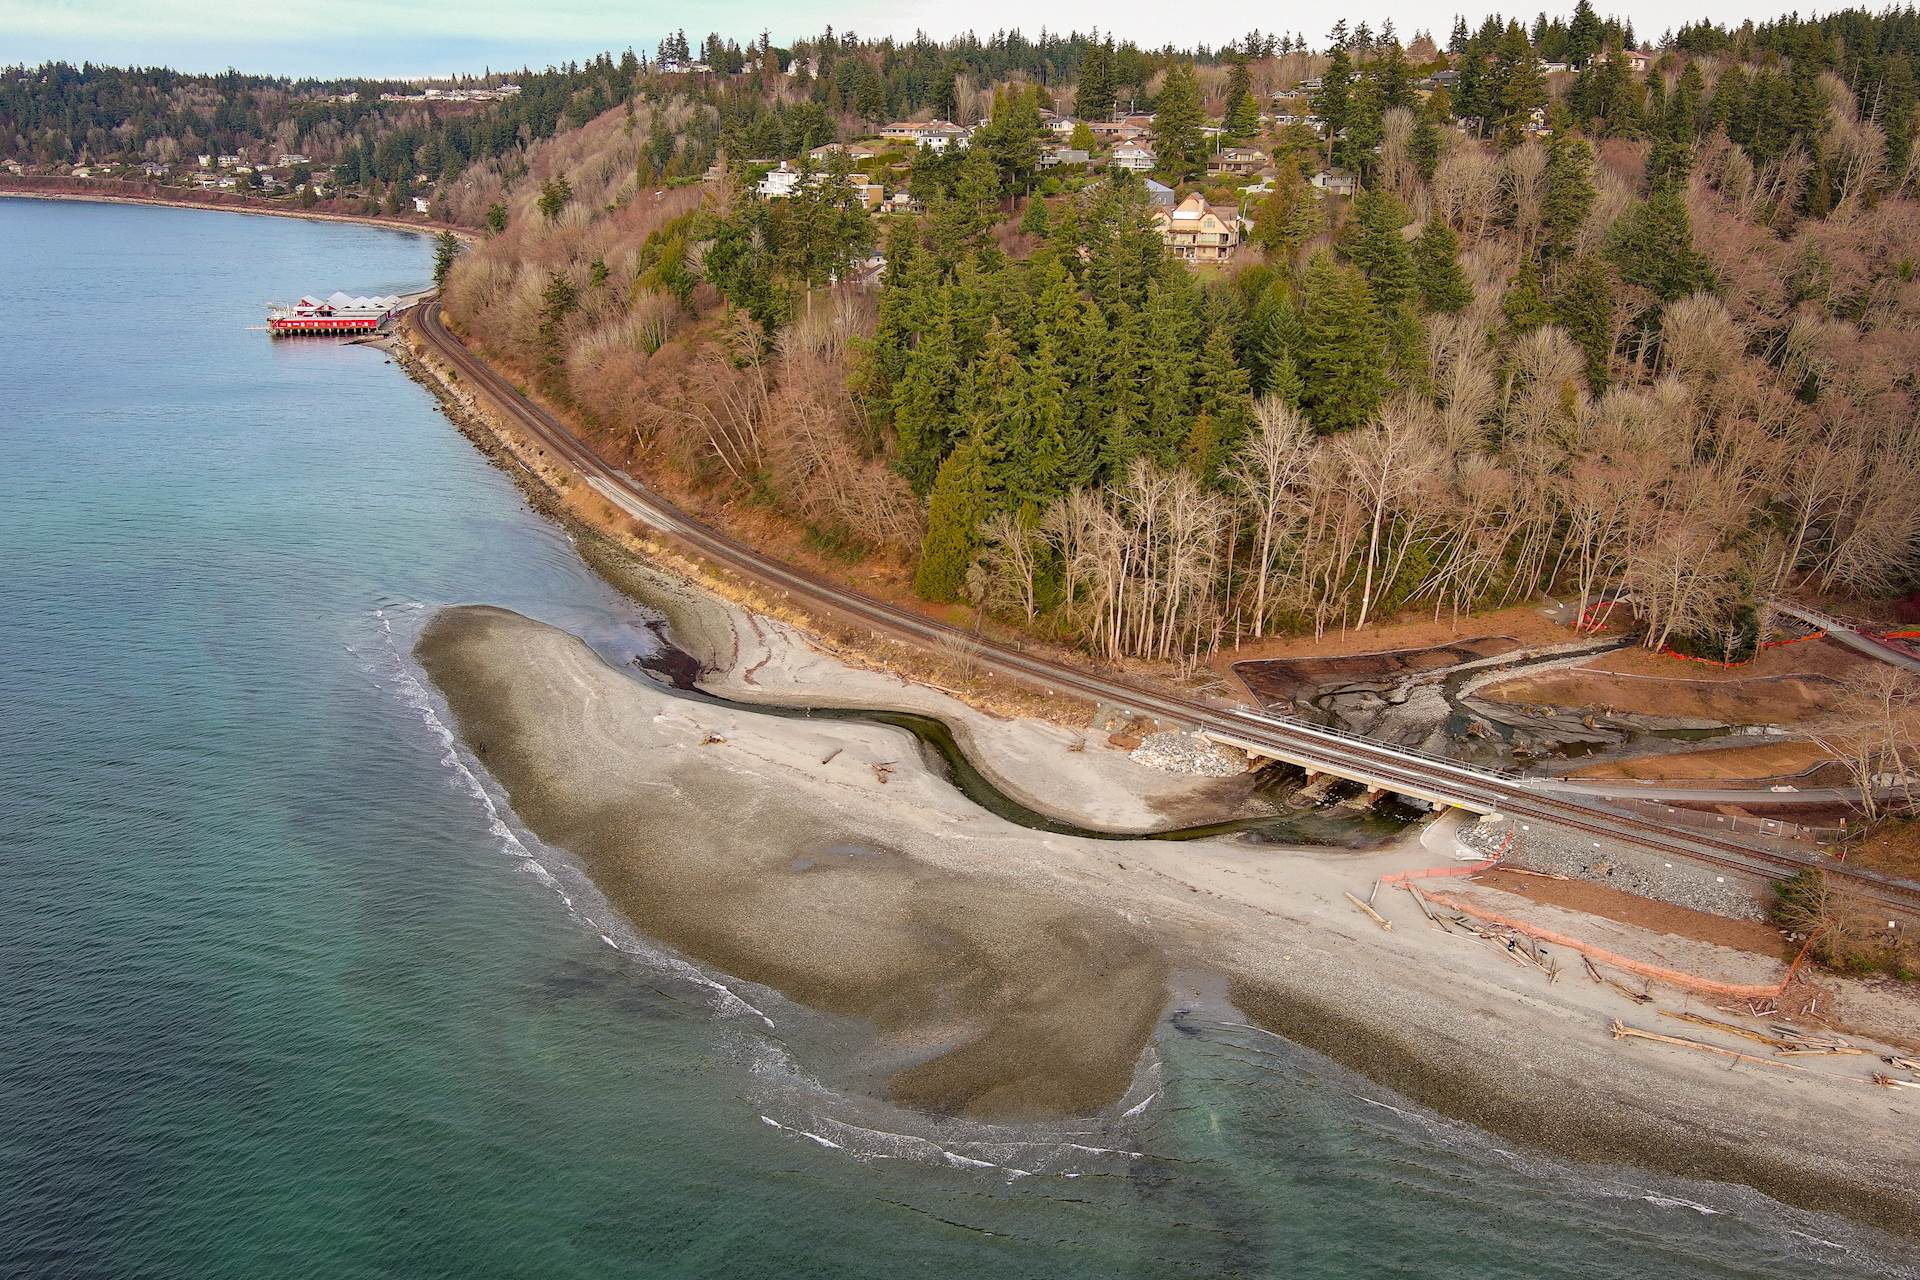 Aerial view of the replaced rail bridge culvert over the restored estuary at the coastal Meadowdale Beach Park